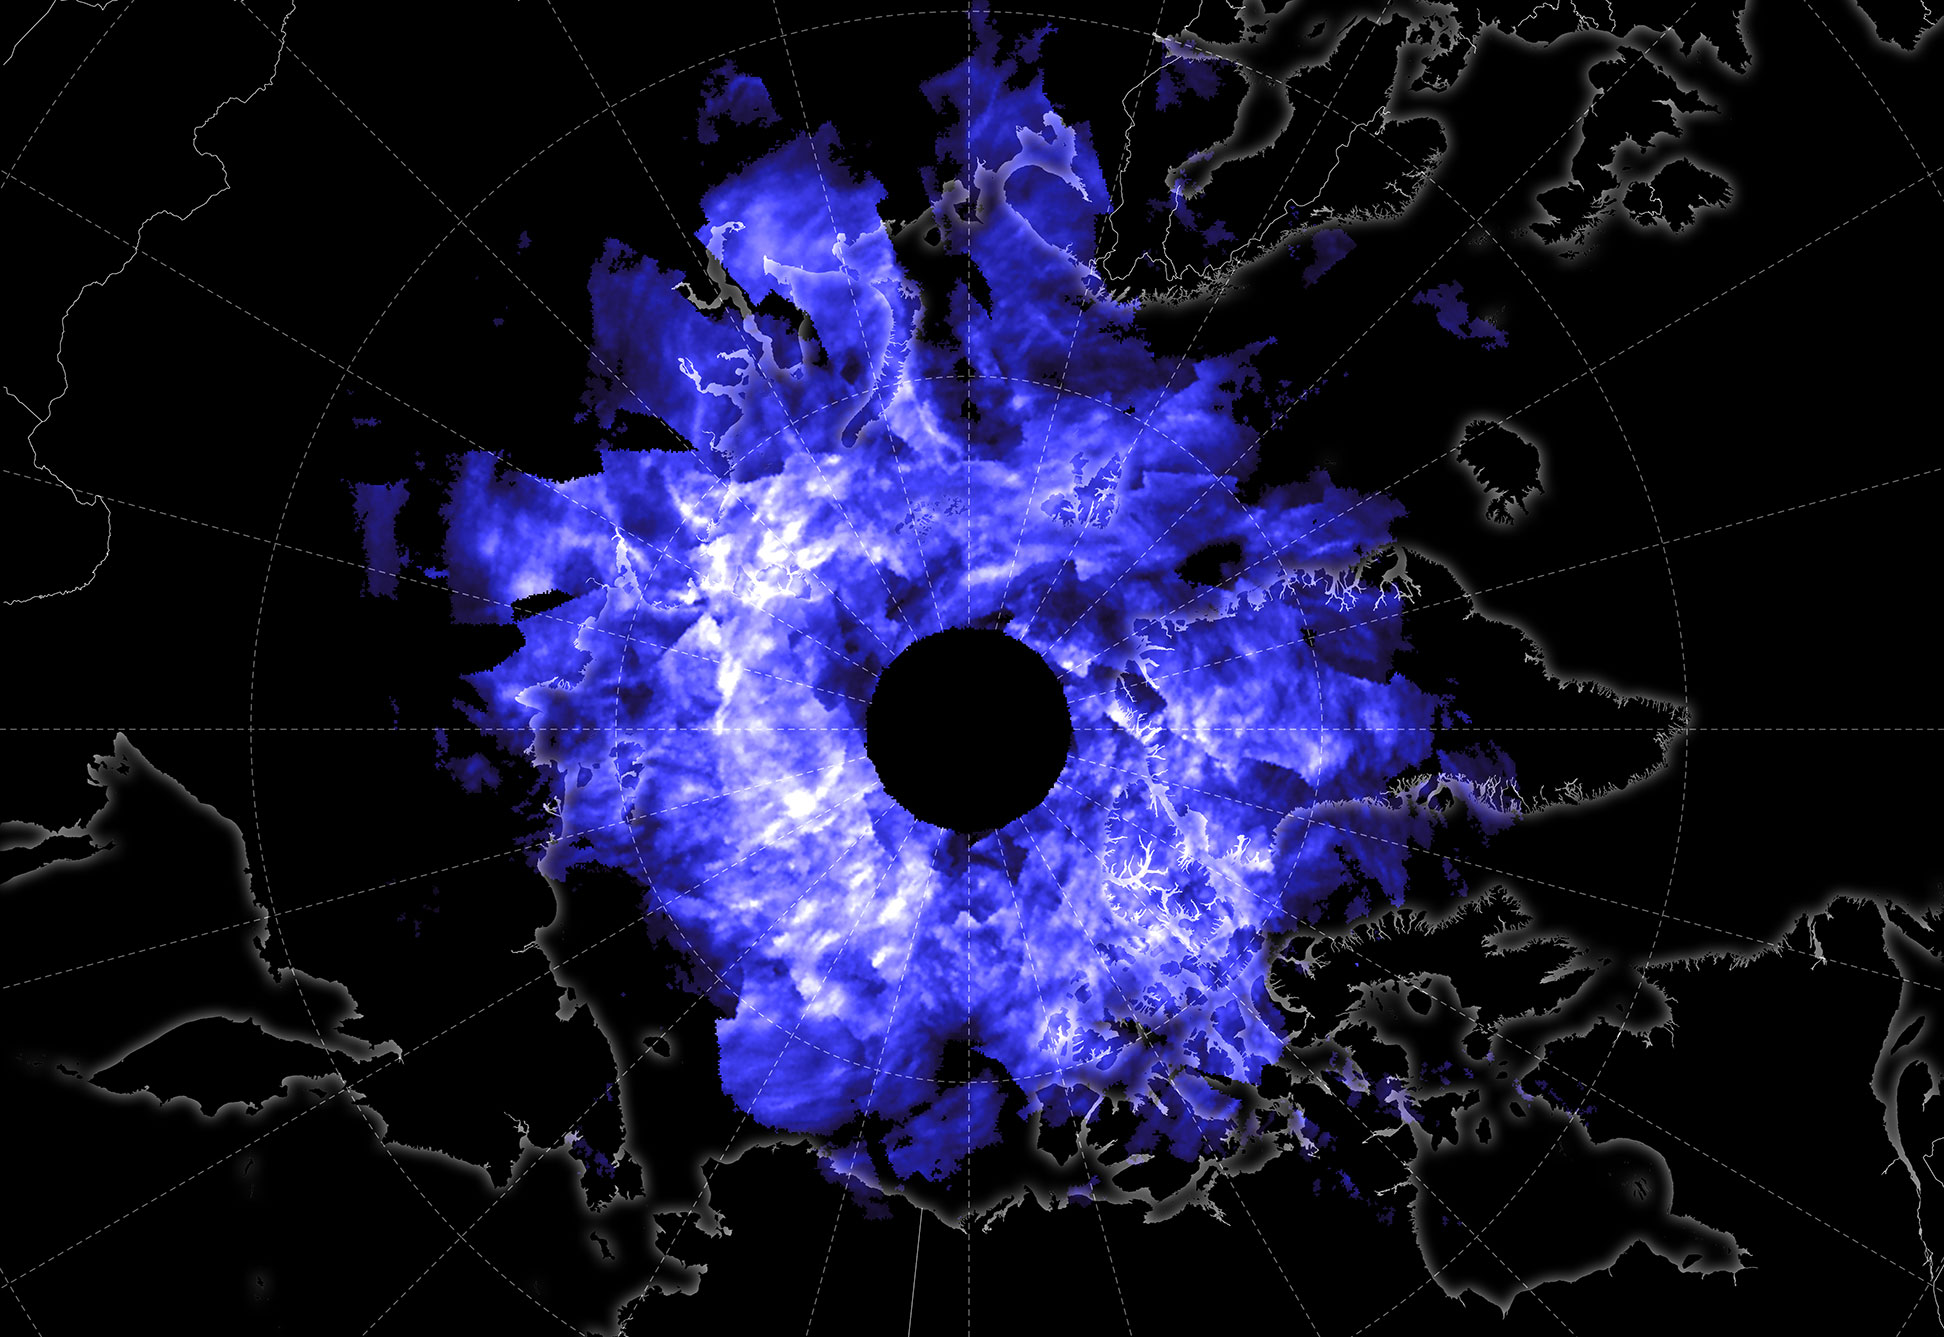 Noctilucent or "night shining" clouds over the North Pole